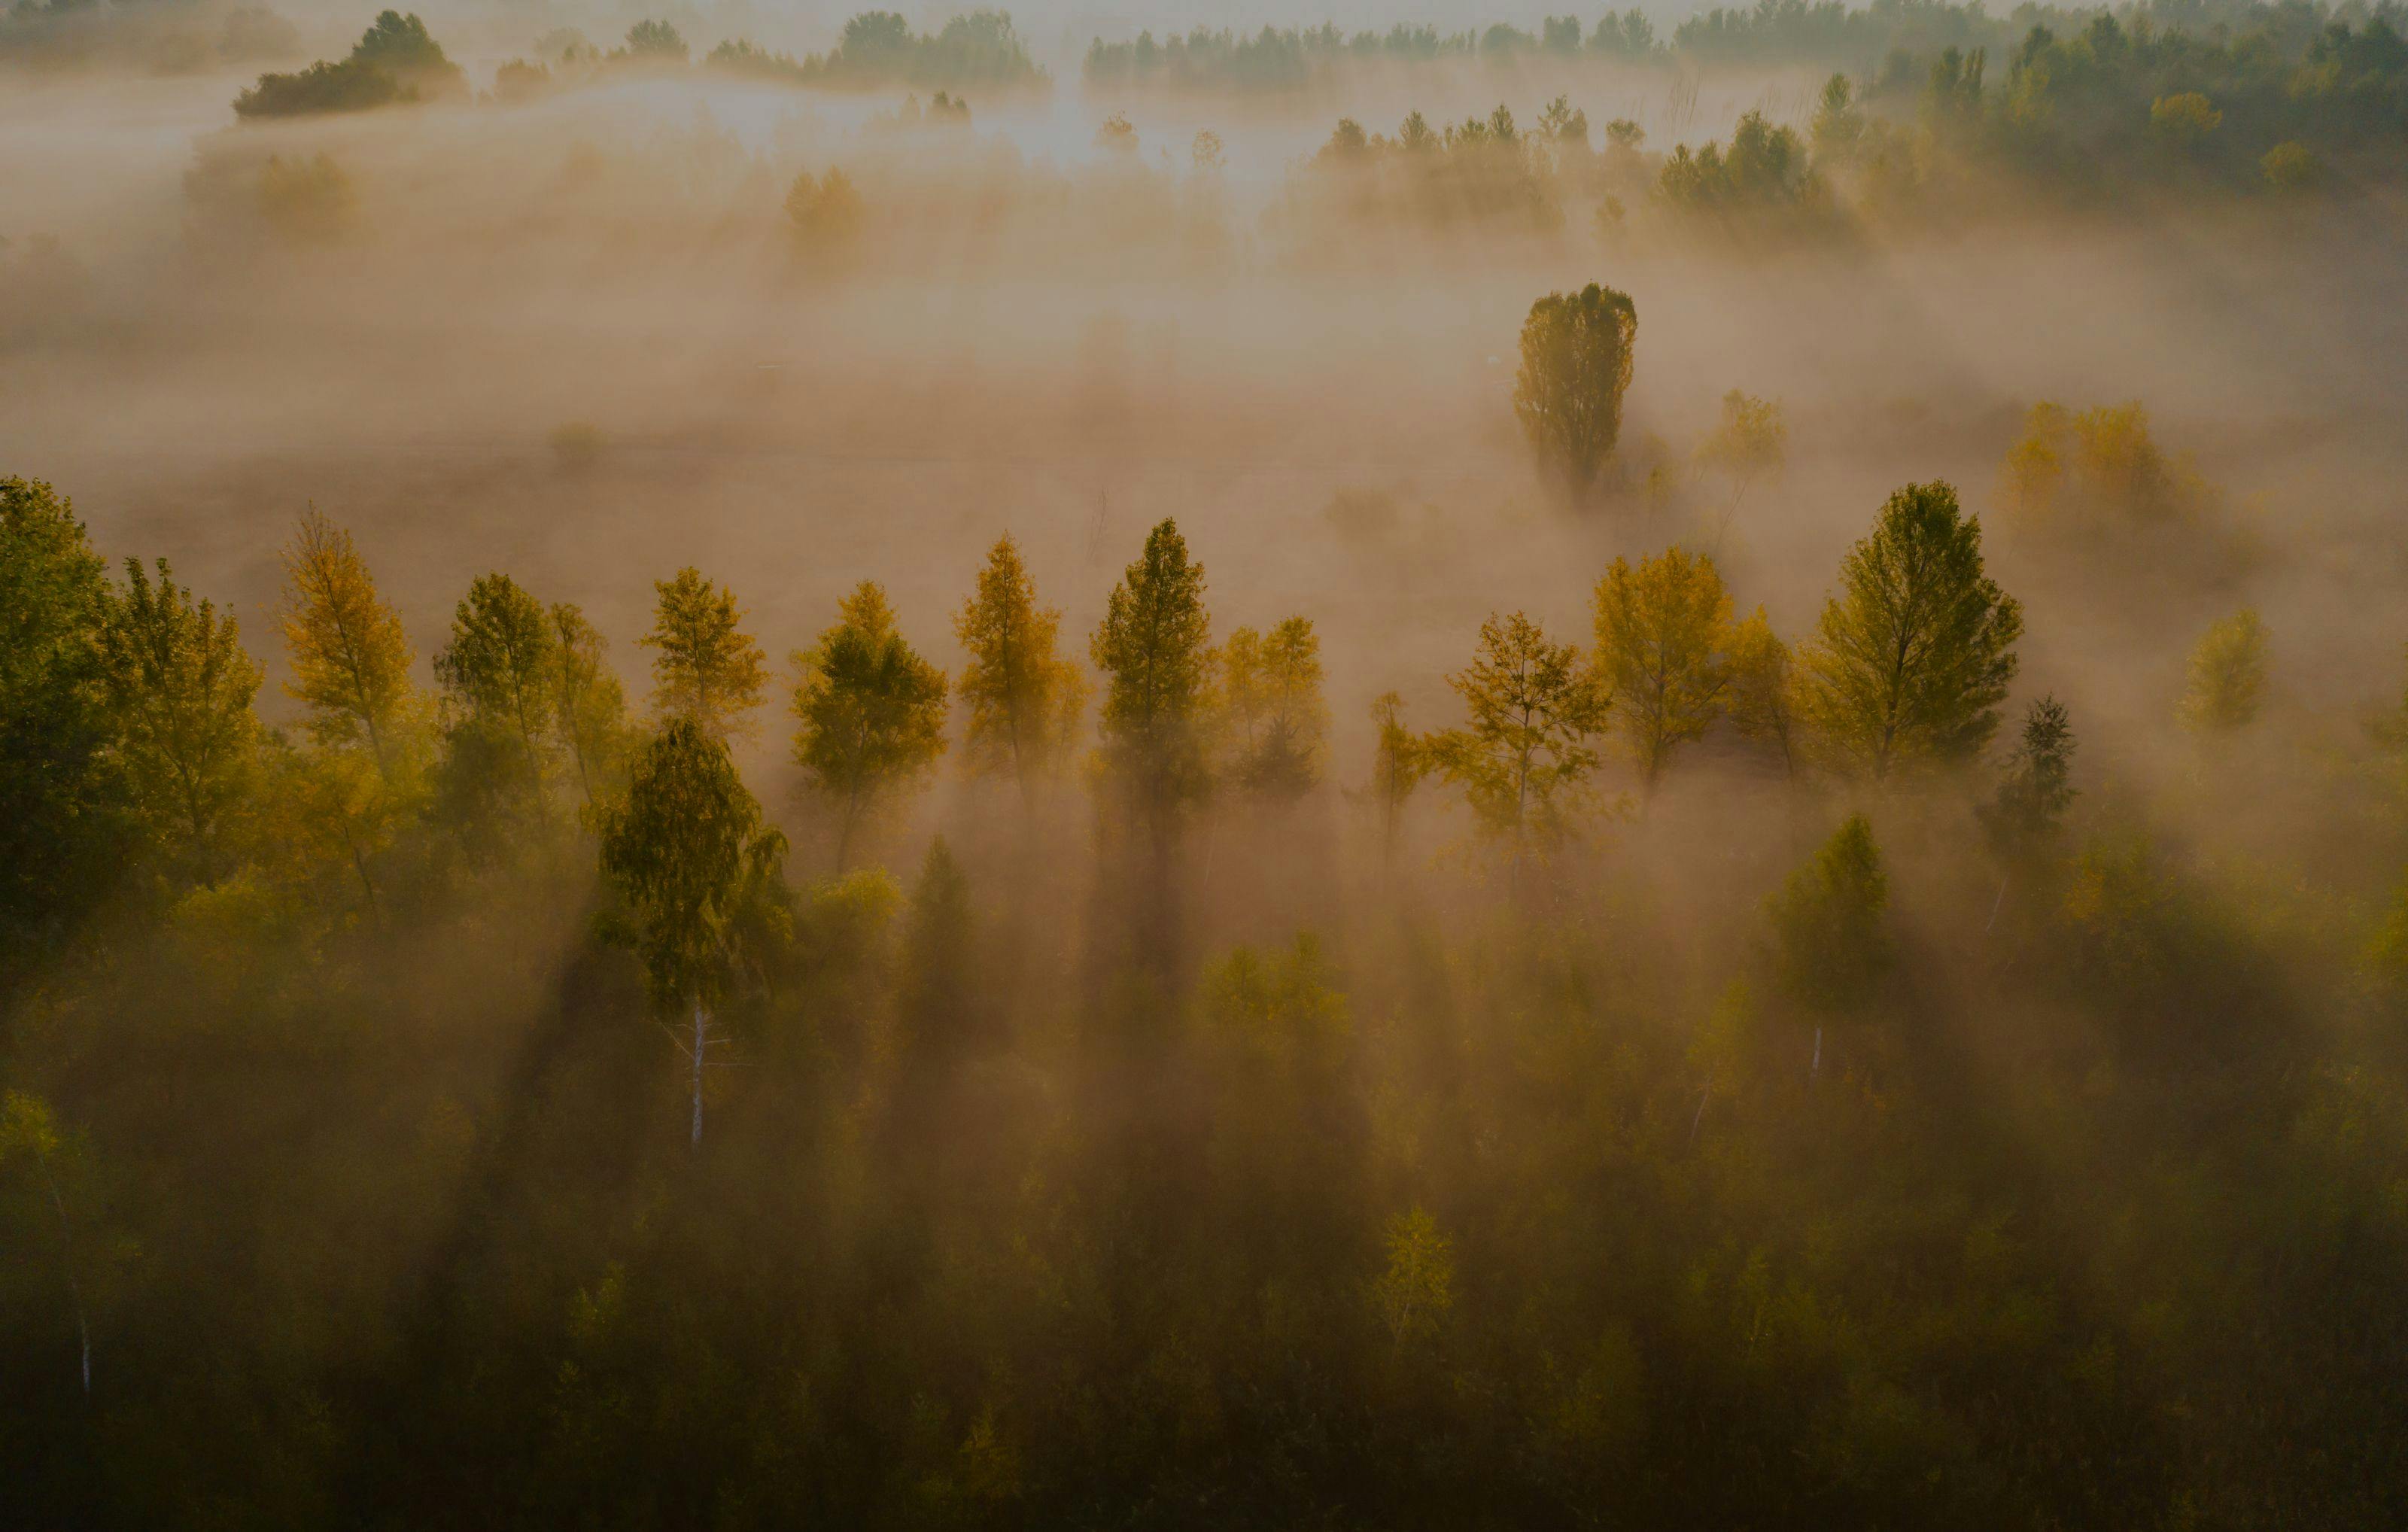 Misty pine forest with beams of sunlight breaking through